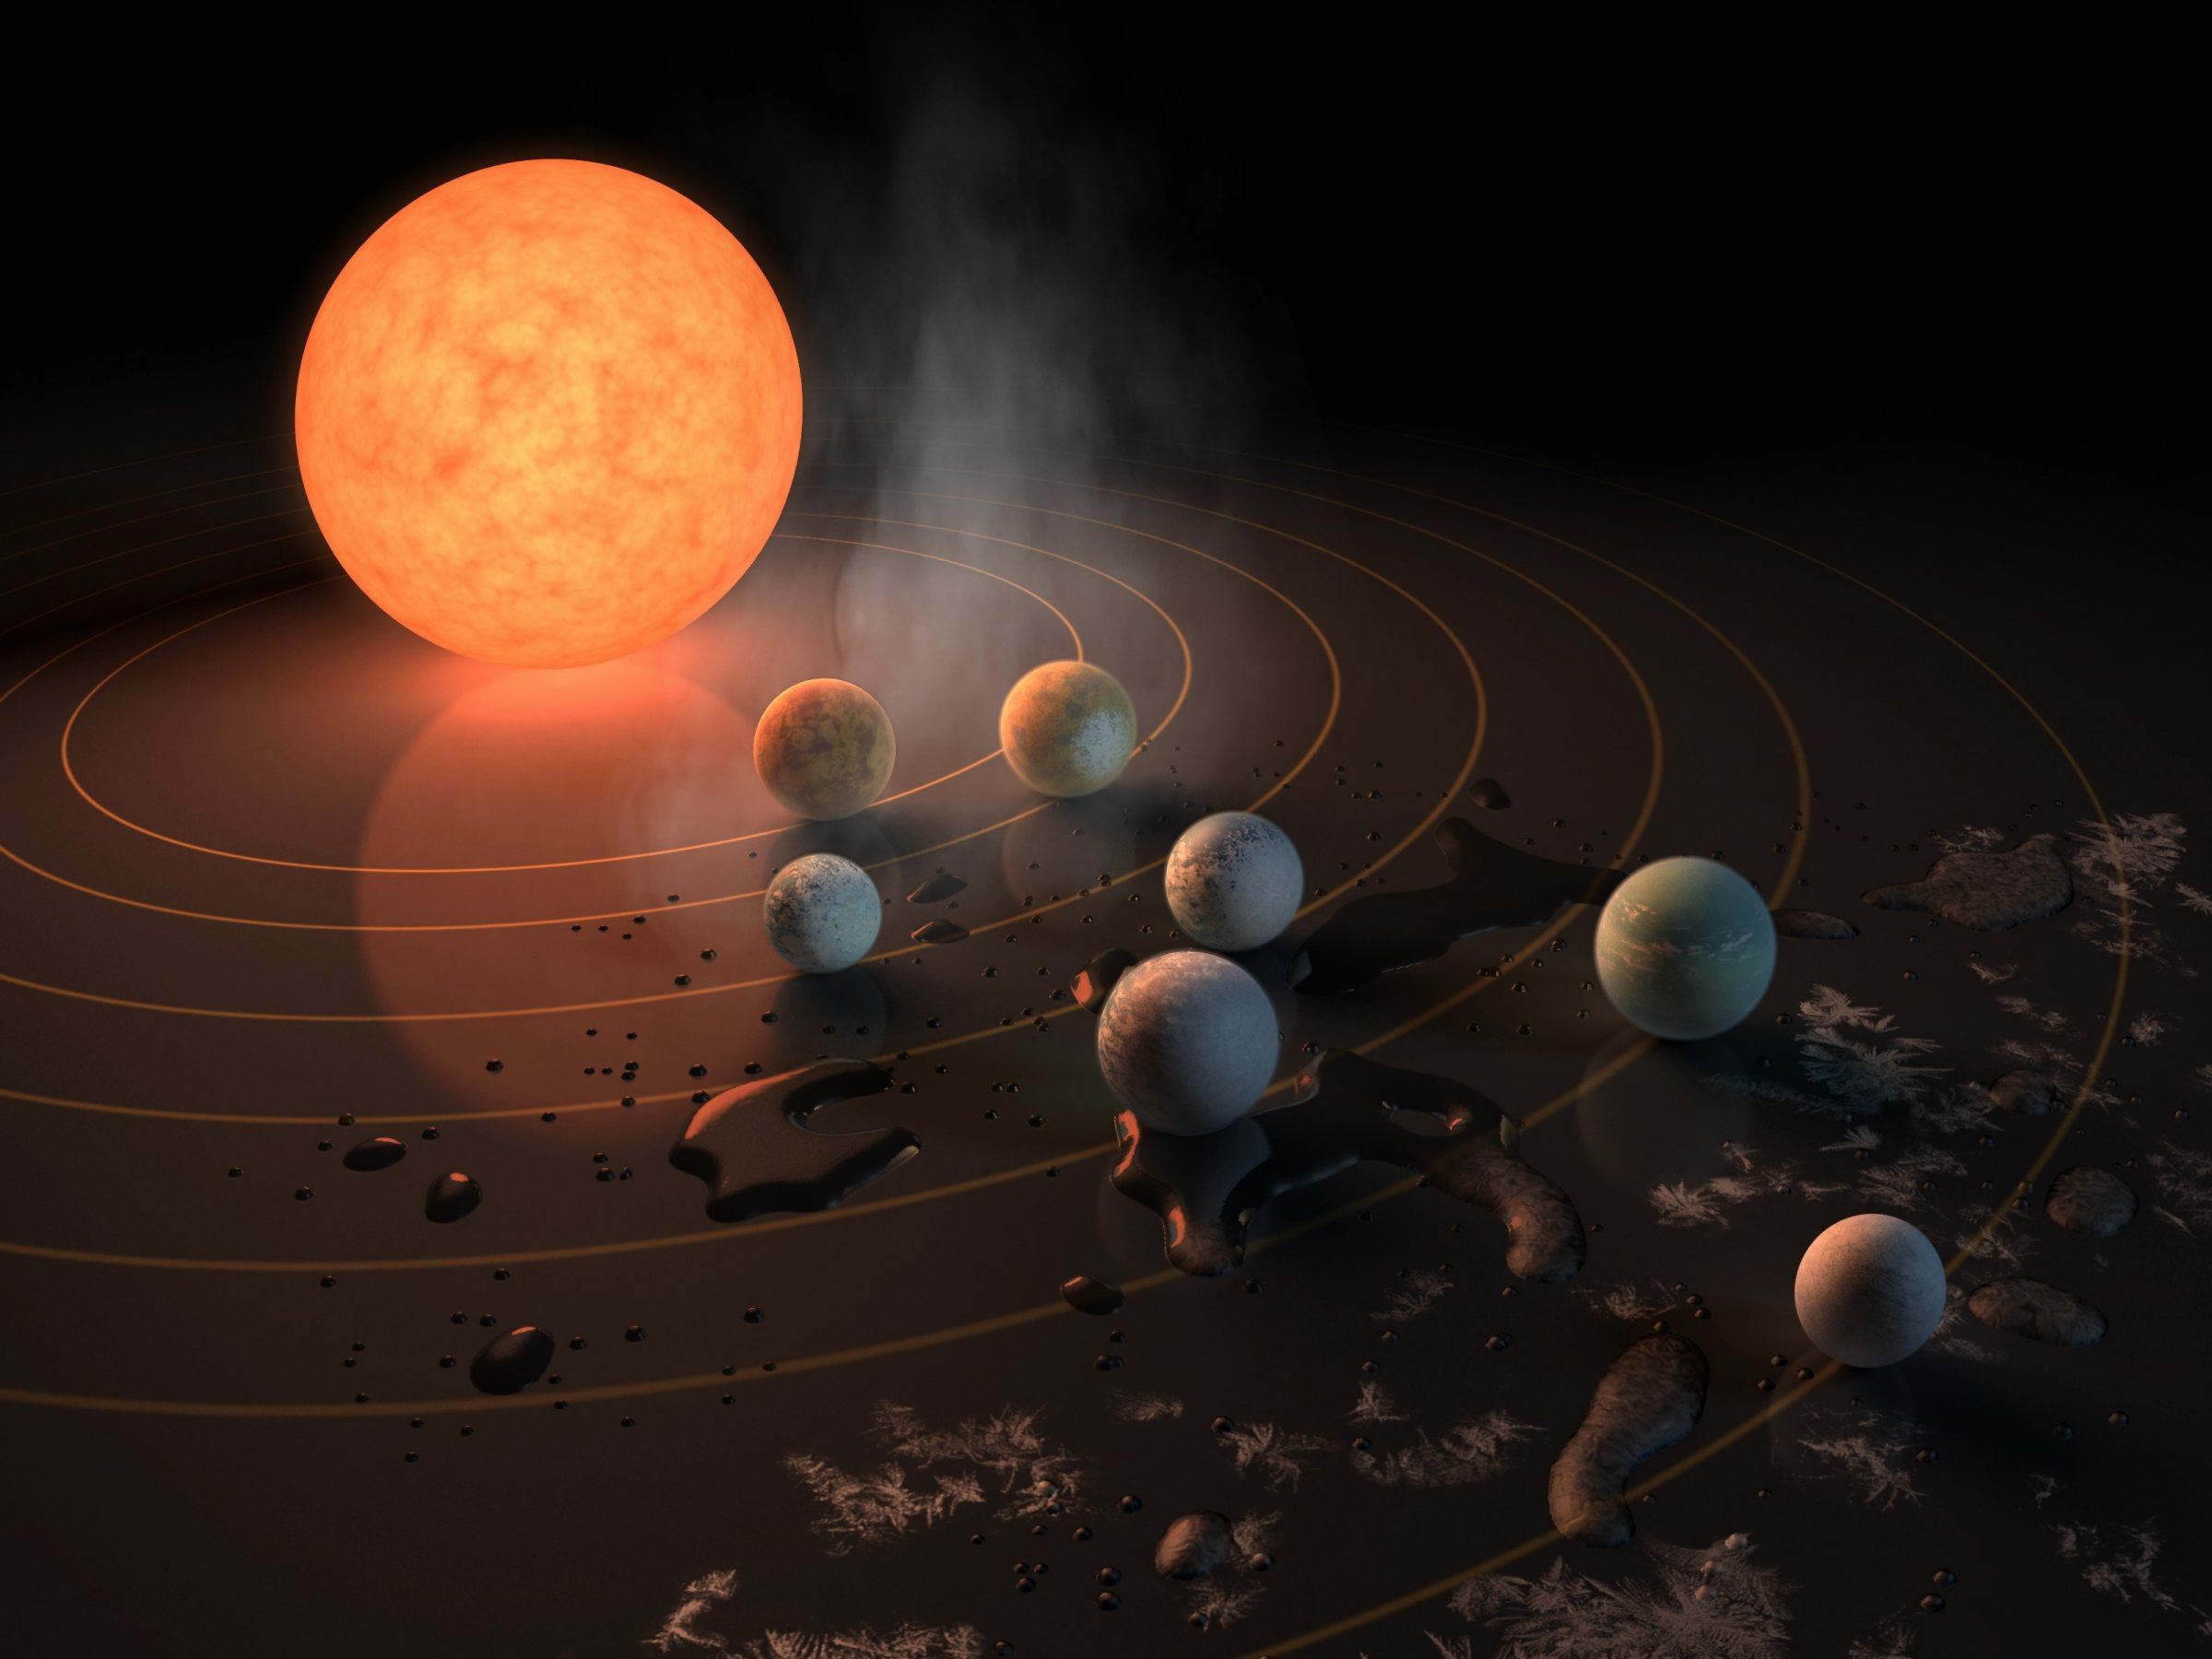 #nasa | Discovered from 7 potentially habitable earth-like planets within a single system